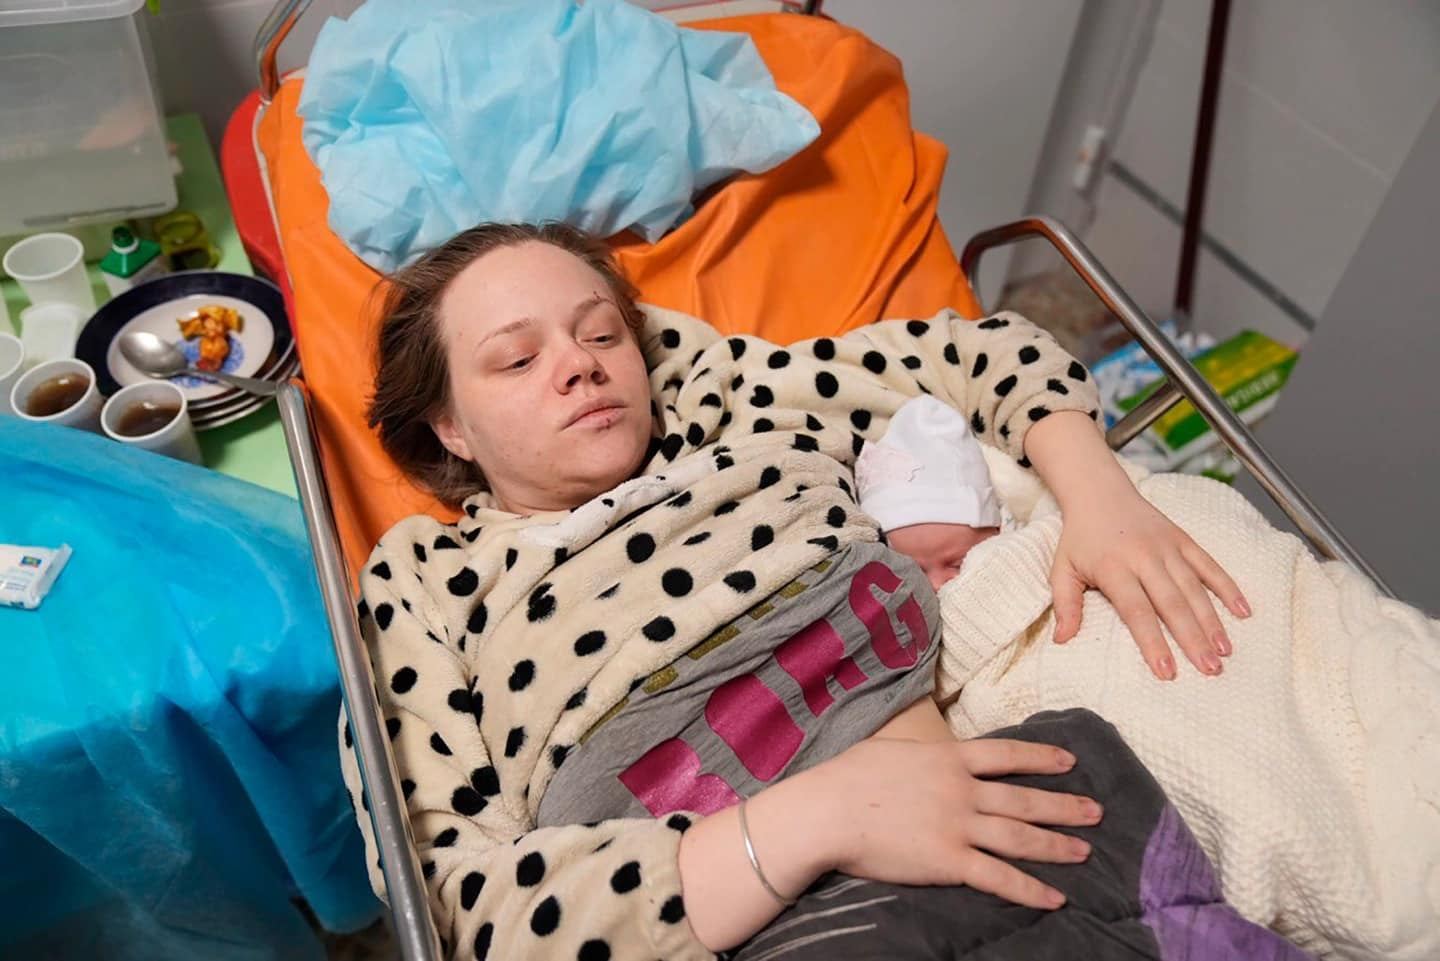 7 A Blogger from Mariupol, Who Was Accused by the Russian Media of Faking A Pregnancy, Gave Birth to a Child